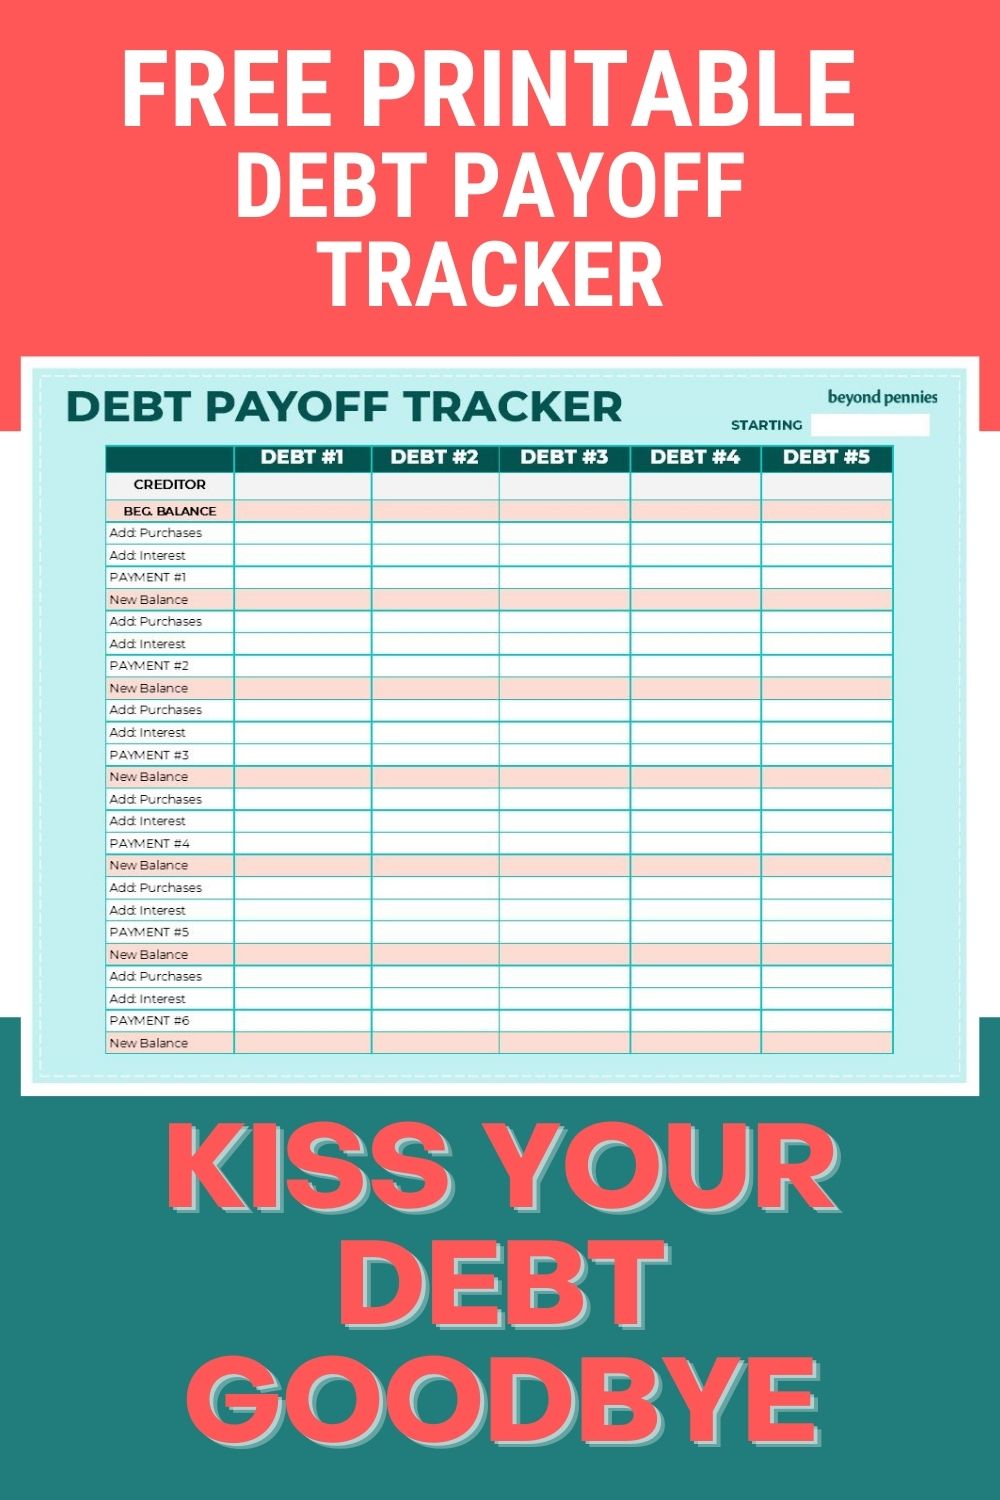 Squash Debt for Good With This Payoff Tracker Worksheet